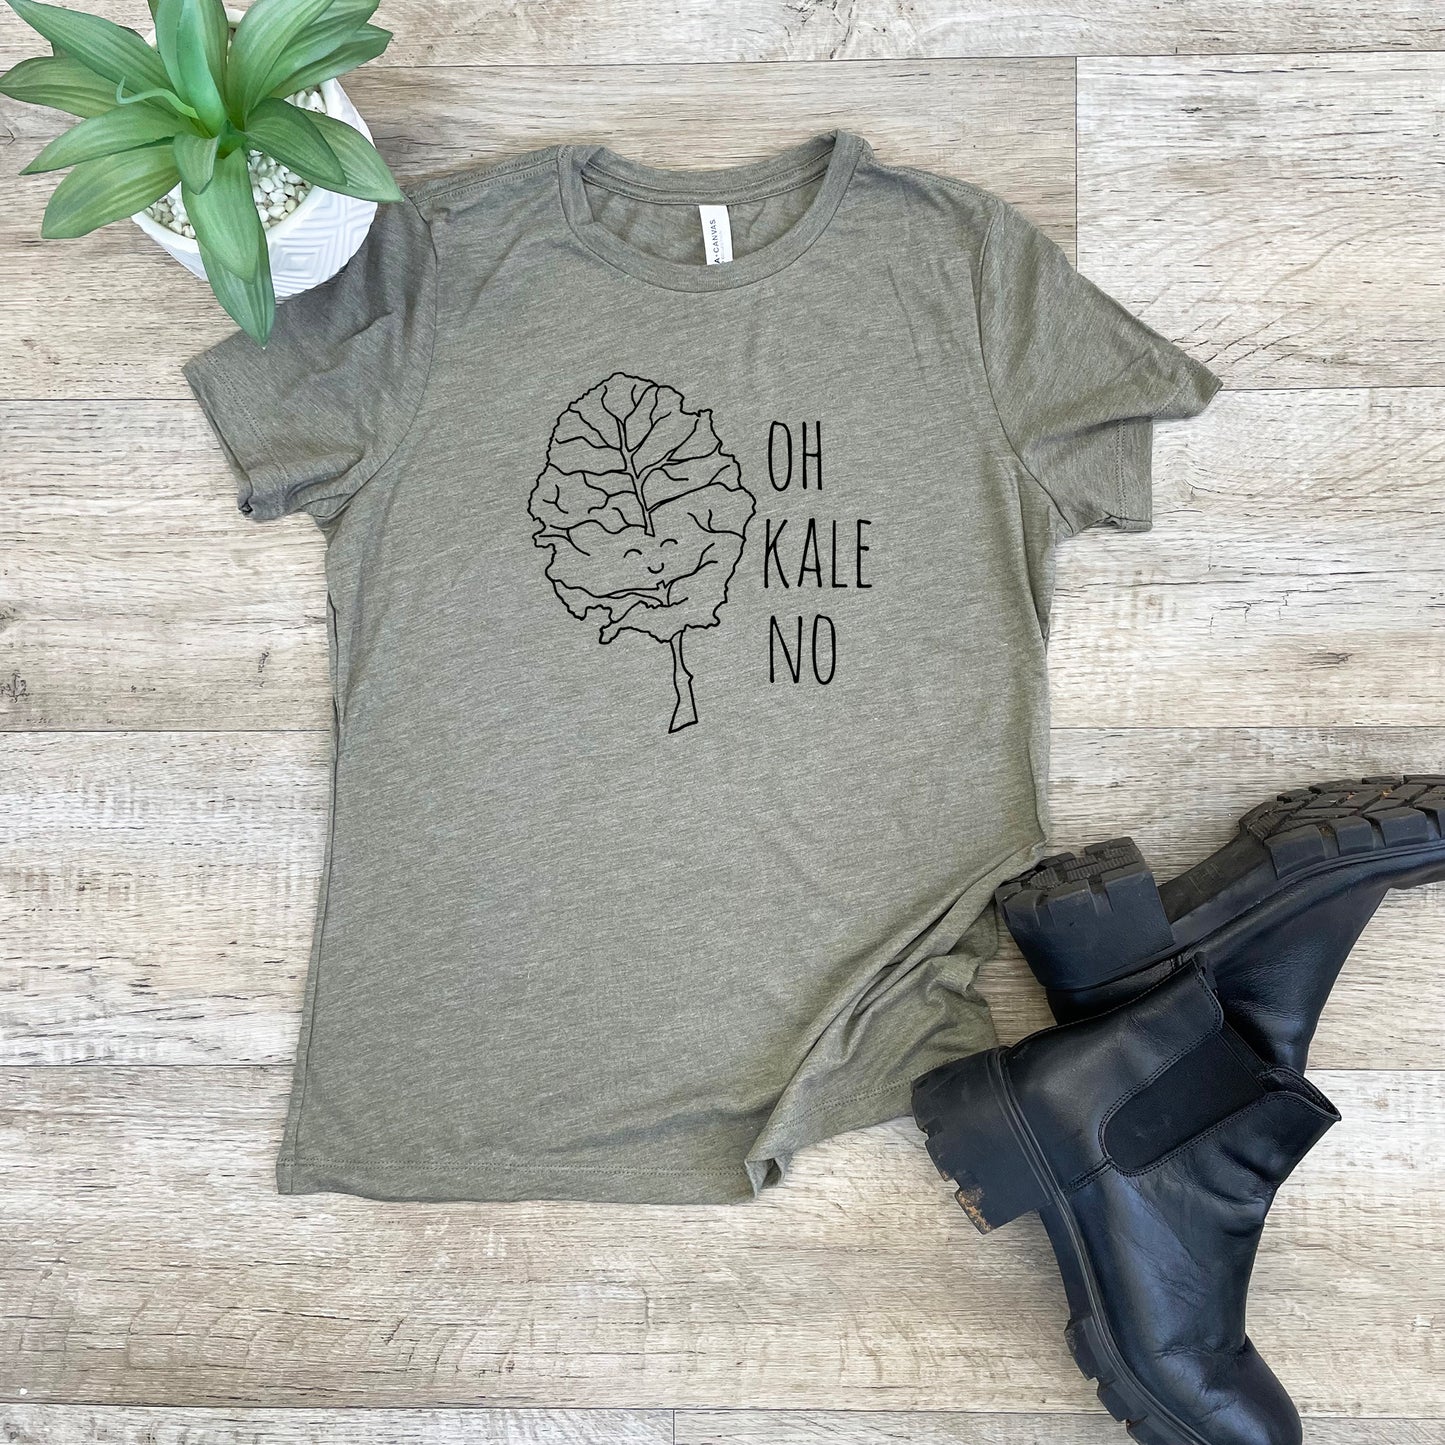 Oh Kale No - Women's Crew Tee - Olive or Dusty Blue